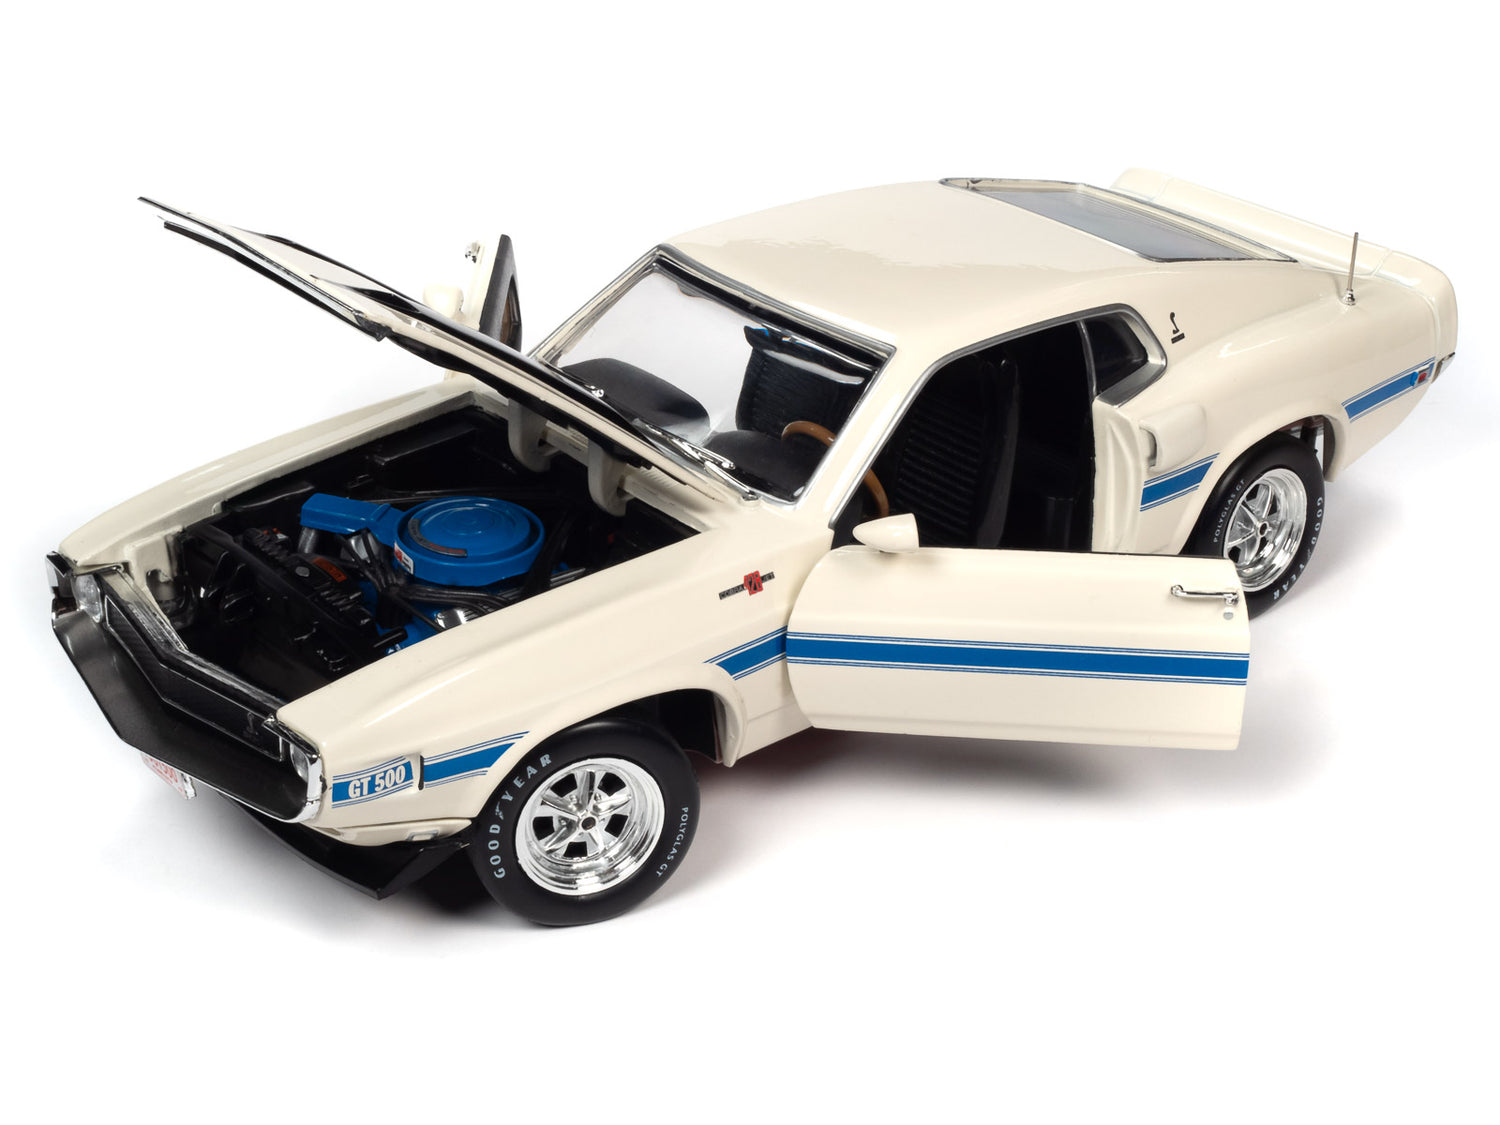 American Muscle 1970 Shelby GT-500 1:18 Scale Diecast